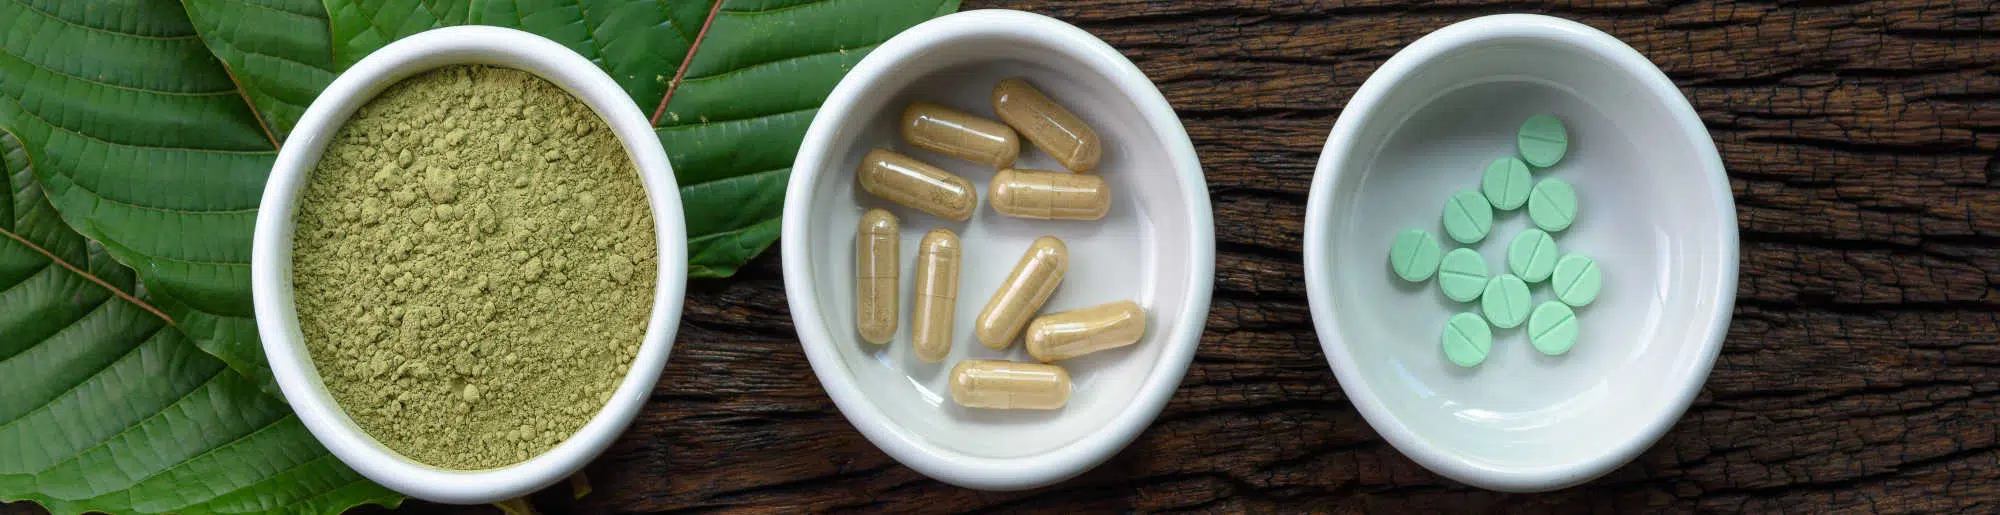 Kratom powder, capsules, and tablets